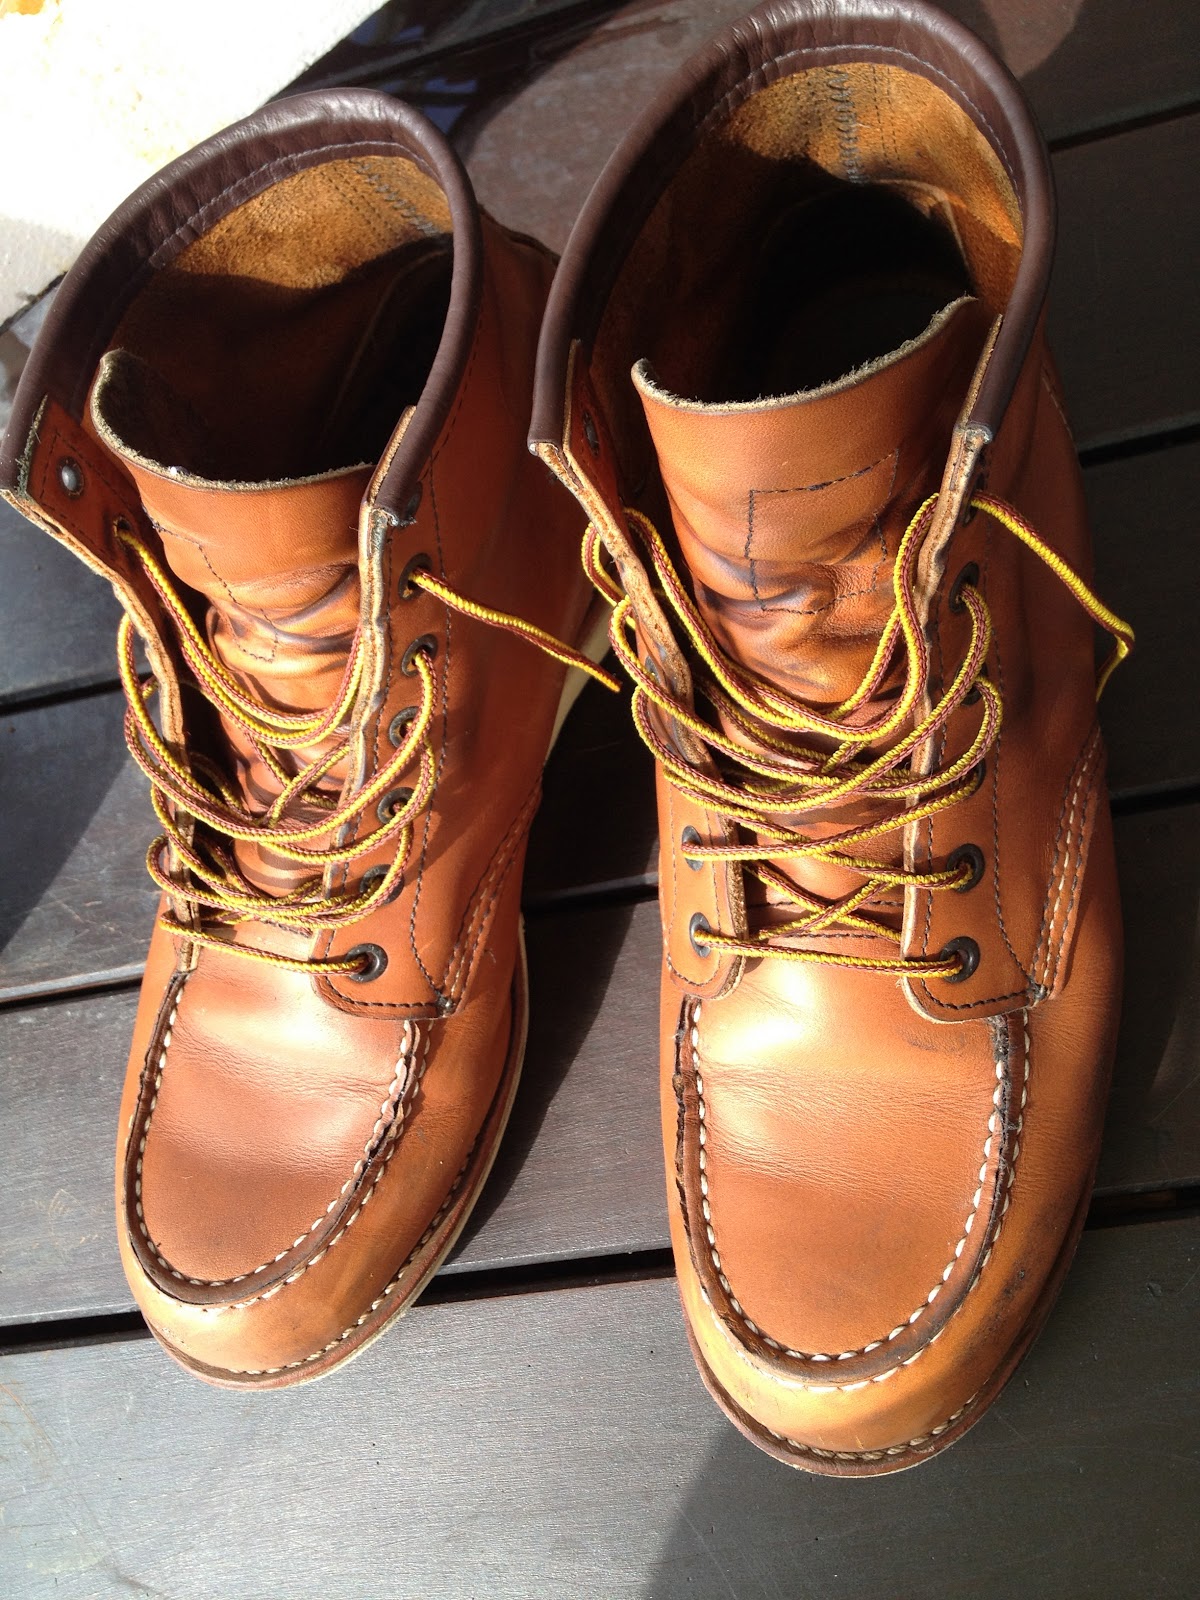 Goody Leathery: Red Wing 875 (after 2 months)